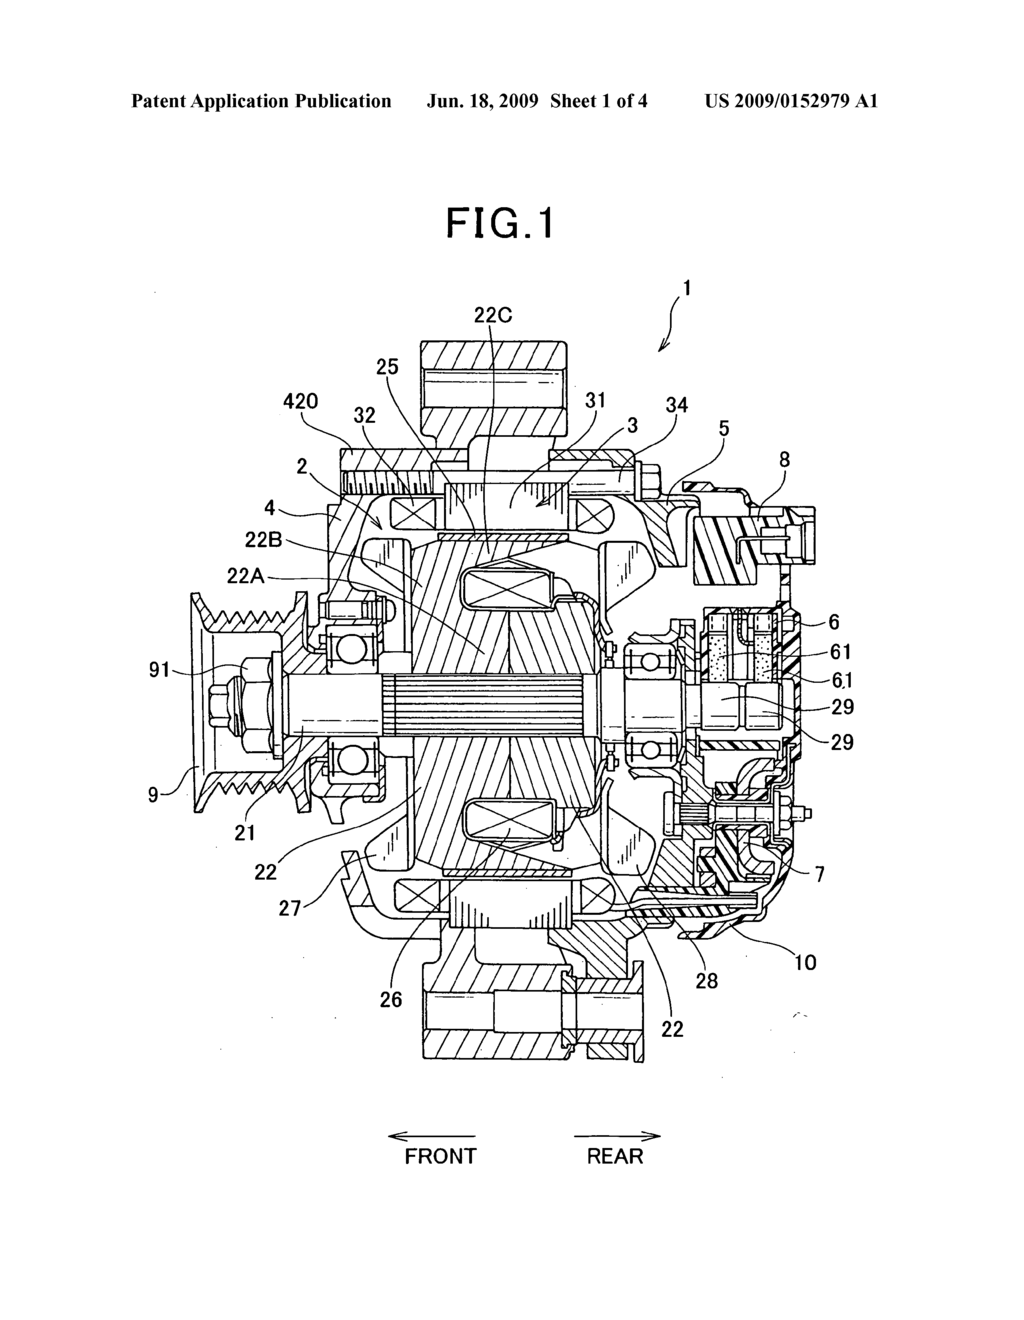 Automotive alternator including annular core having protrusions and recesses alternately formed on its outer surface - diagram, schematic, and image 02